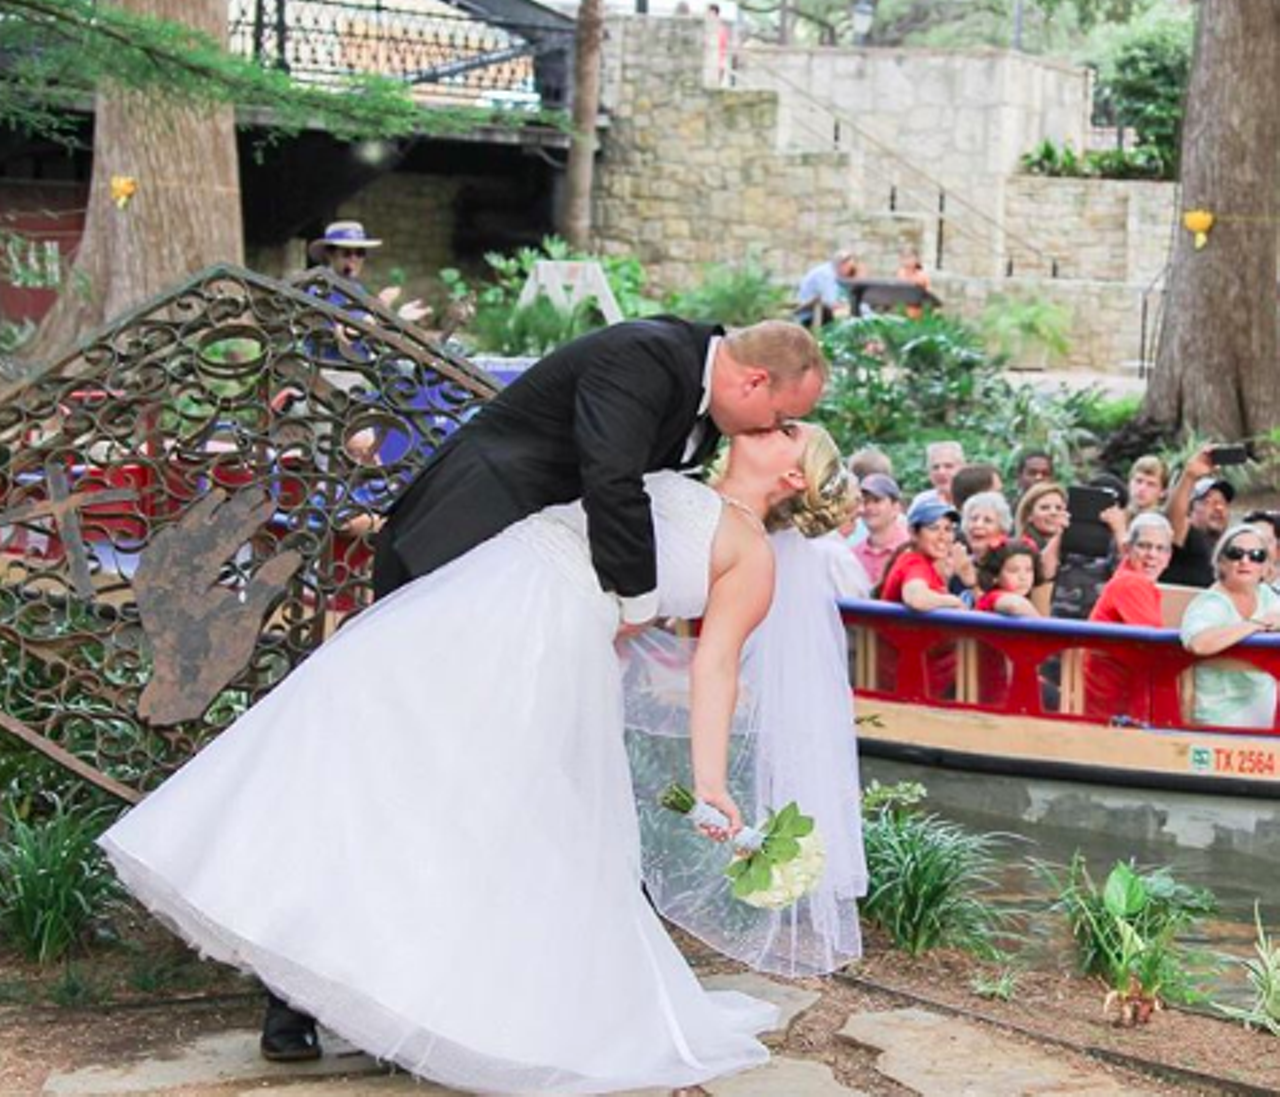 Be a wedding crasher at Marriage Island
San Antonio River Walk in front of the Hotel Contessa, 
Ok so this isn’t something you can really plan, but if you happen to be in the area and see some peeps in wedding attire, take advantage of the situation. There’s an islet in the middle of the River that is supposedly heart-shaped and considered good luck to new marriages. Now, more than 200 couples get married here annually.
Photo via Instagram / karina_franco_photography